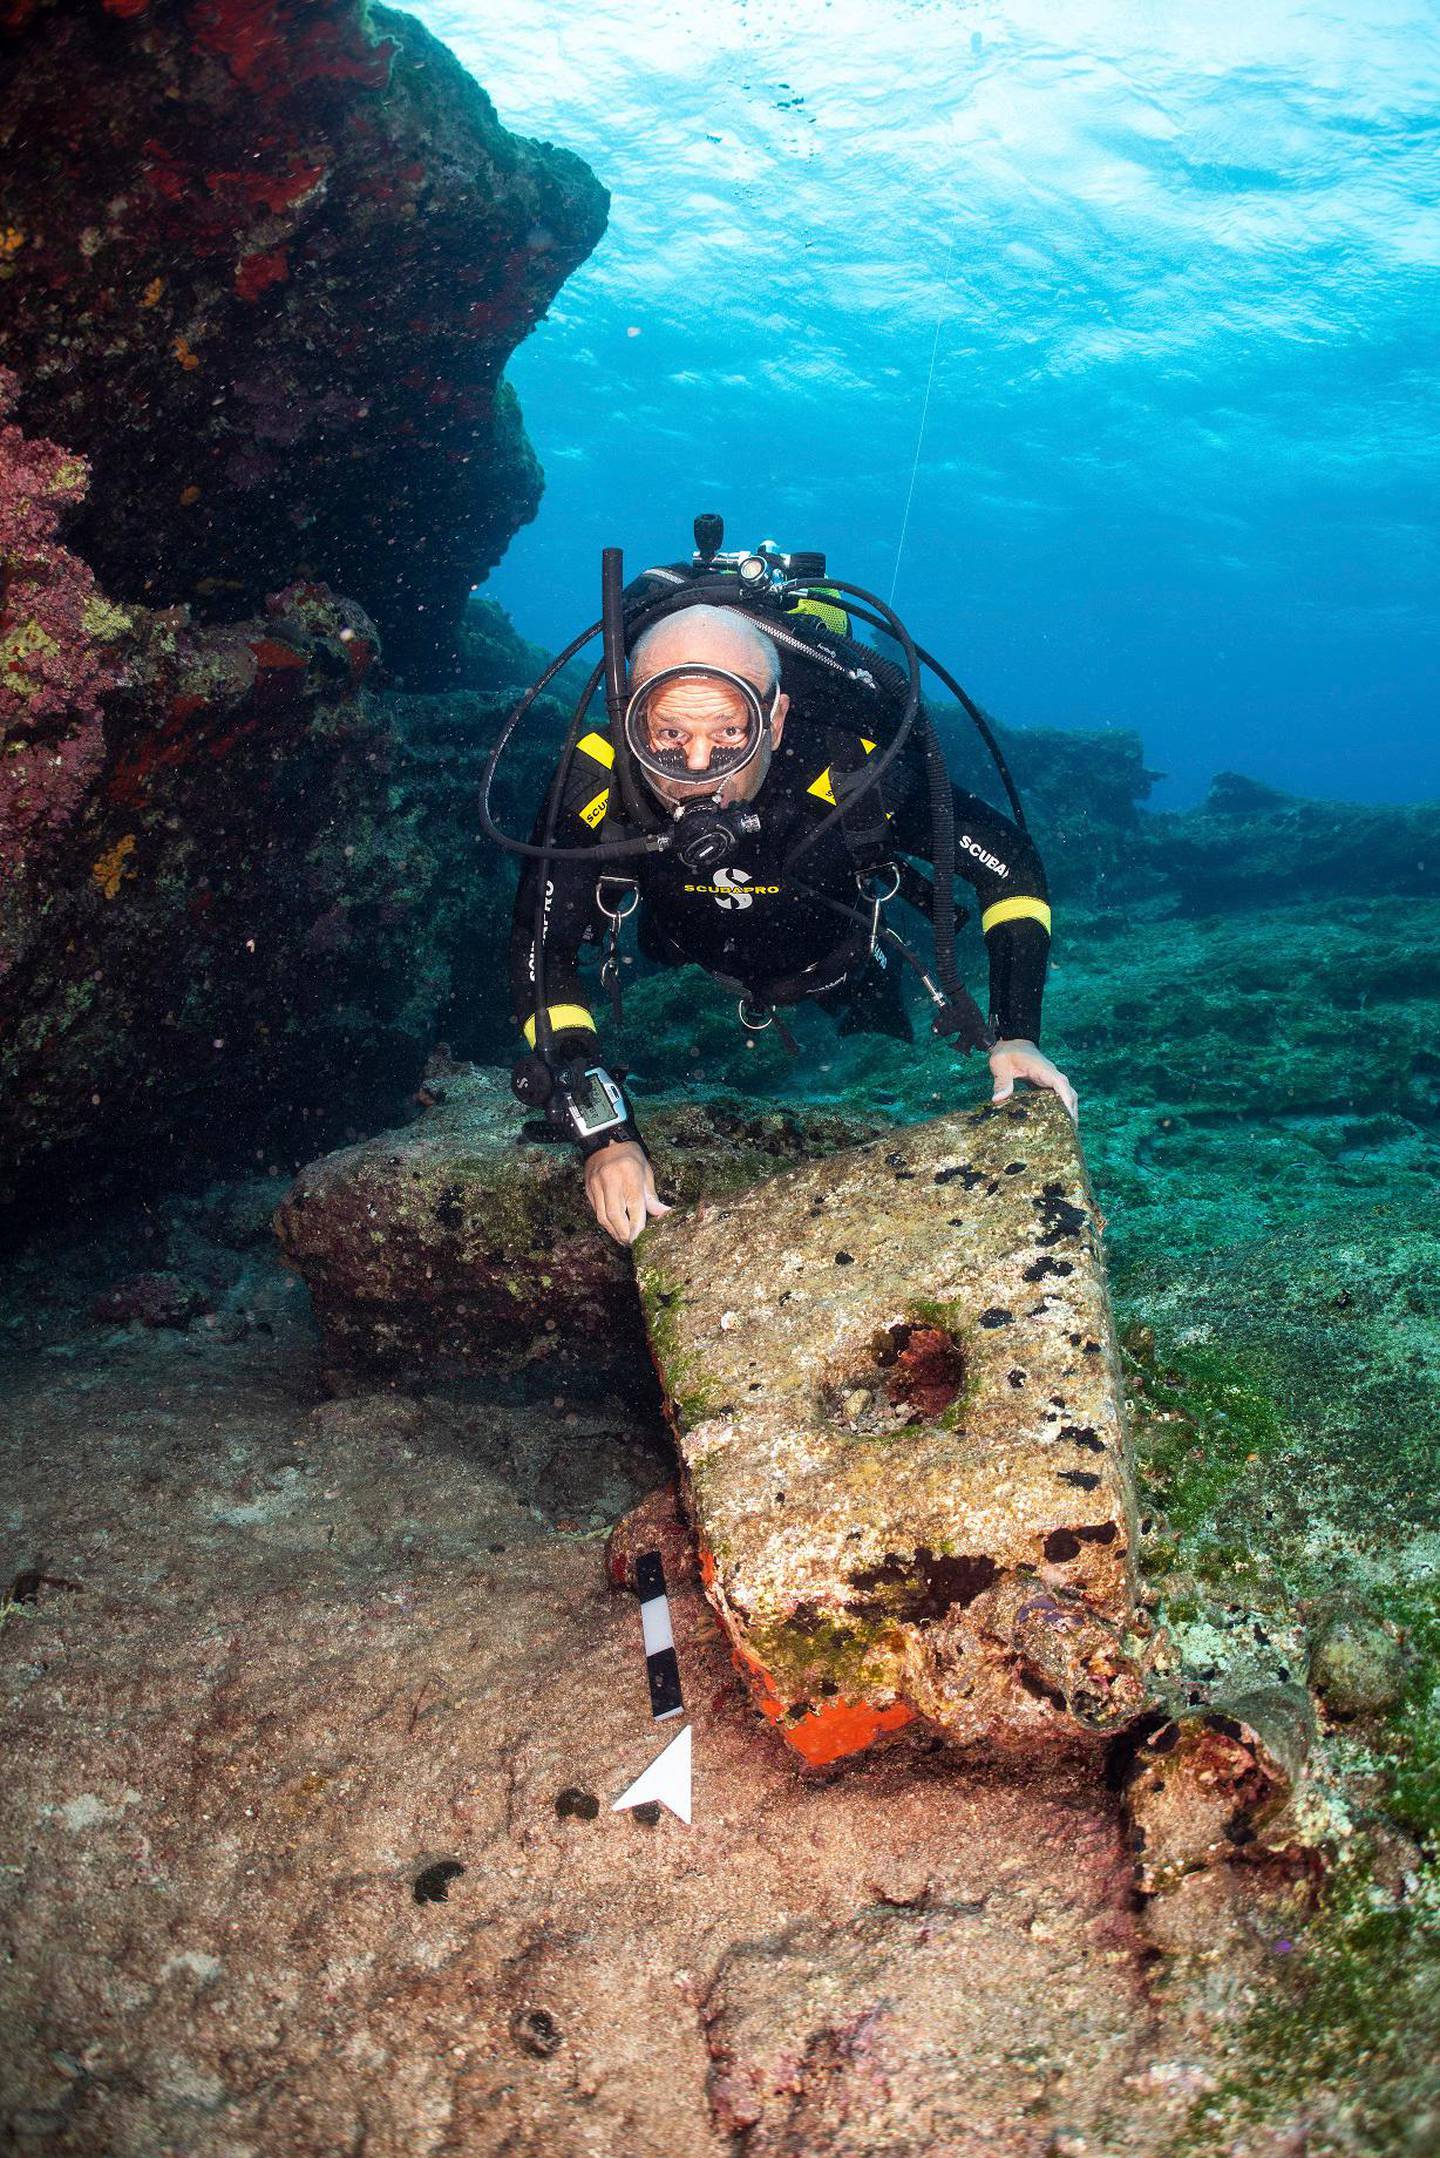 In this undated photo provide by the Greek Culture Ministry on Monday, Nov. 4, 2019, an archeologist takes part in an underwater excavation at the small Aegean island of Kasos, Greece. Greece's Culture Ministry says three shipwrecks from ancient and mediaeval times and large sections of their cargoes have been discovered off the island of Kasos. (Frode Kvalo/Greek Culture Ministry via AP)